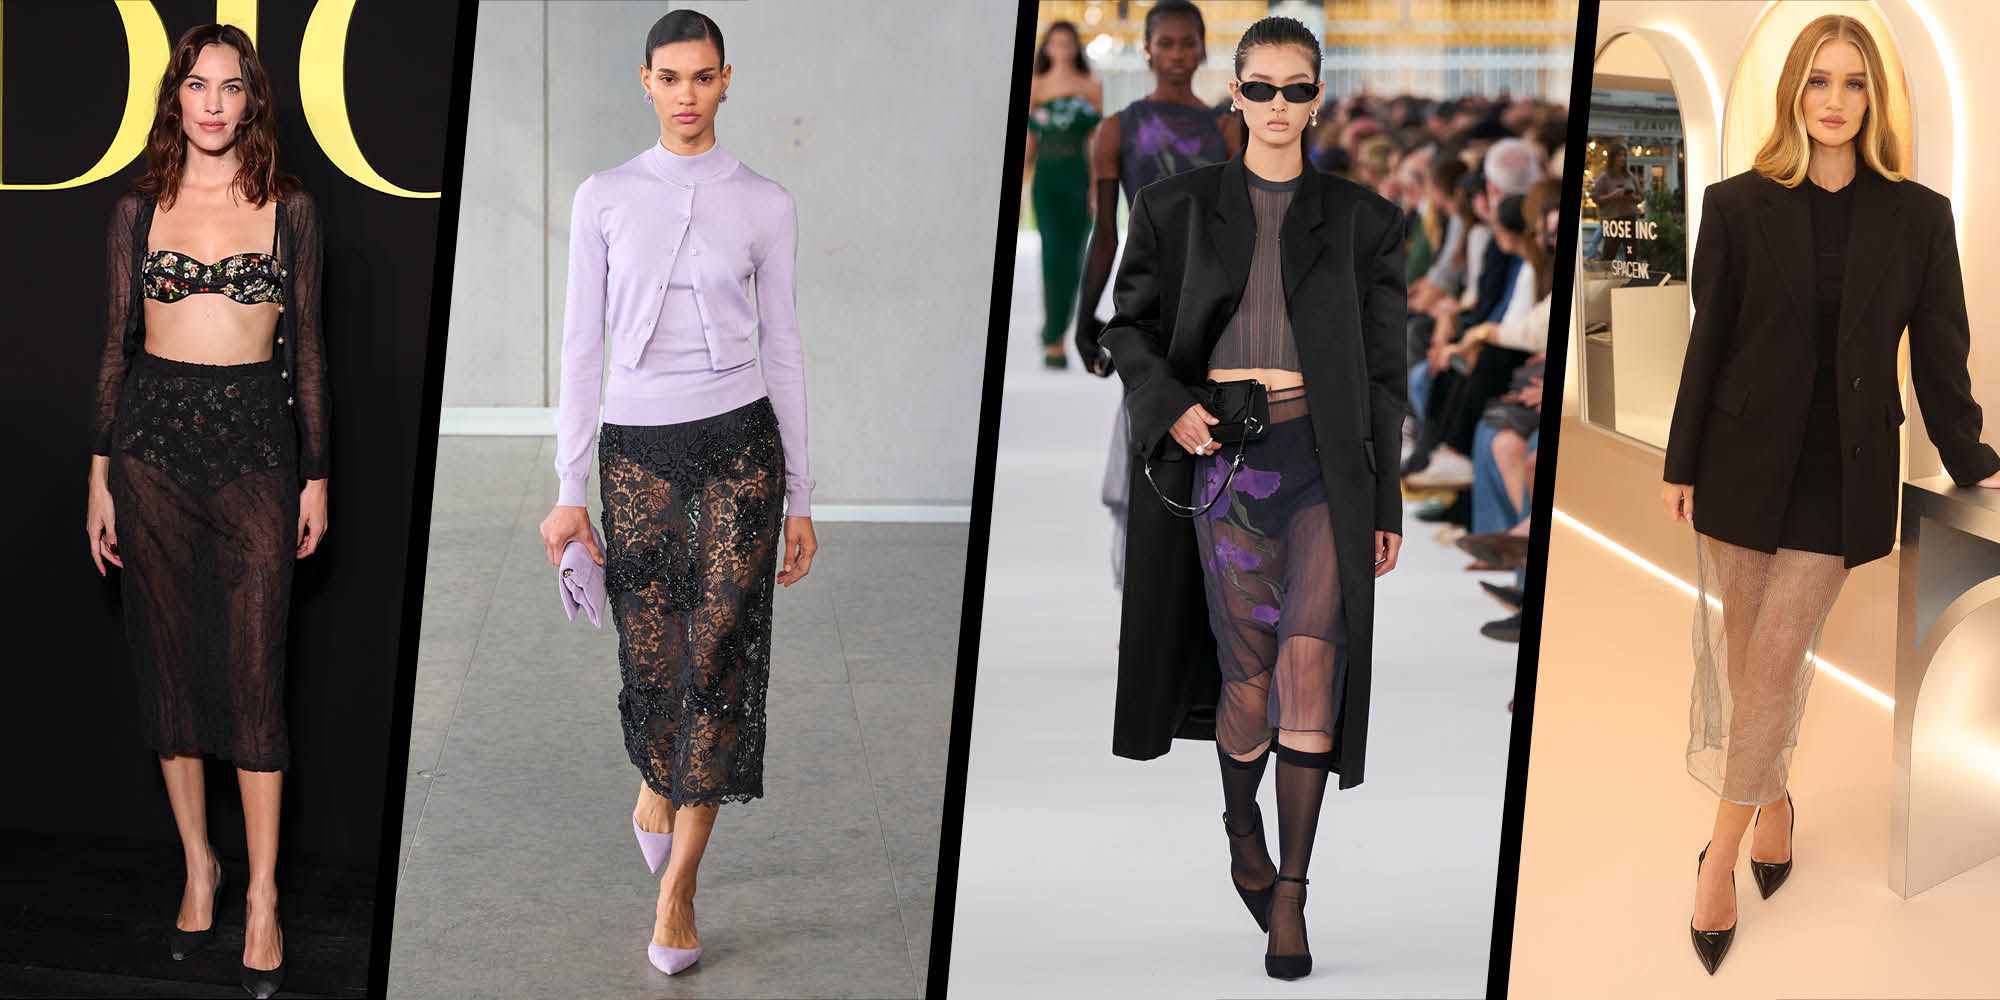 Sheer Dresses & Tops Are The Most Daring Trend This Season. Here's